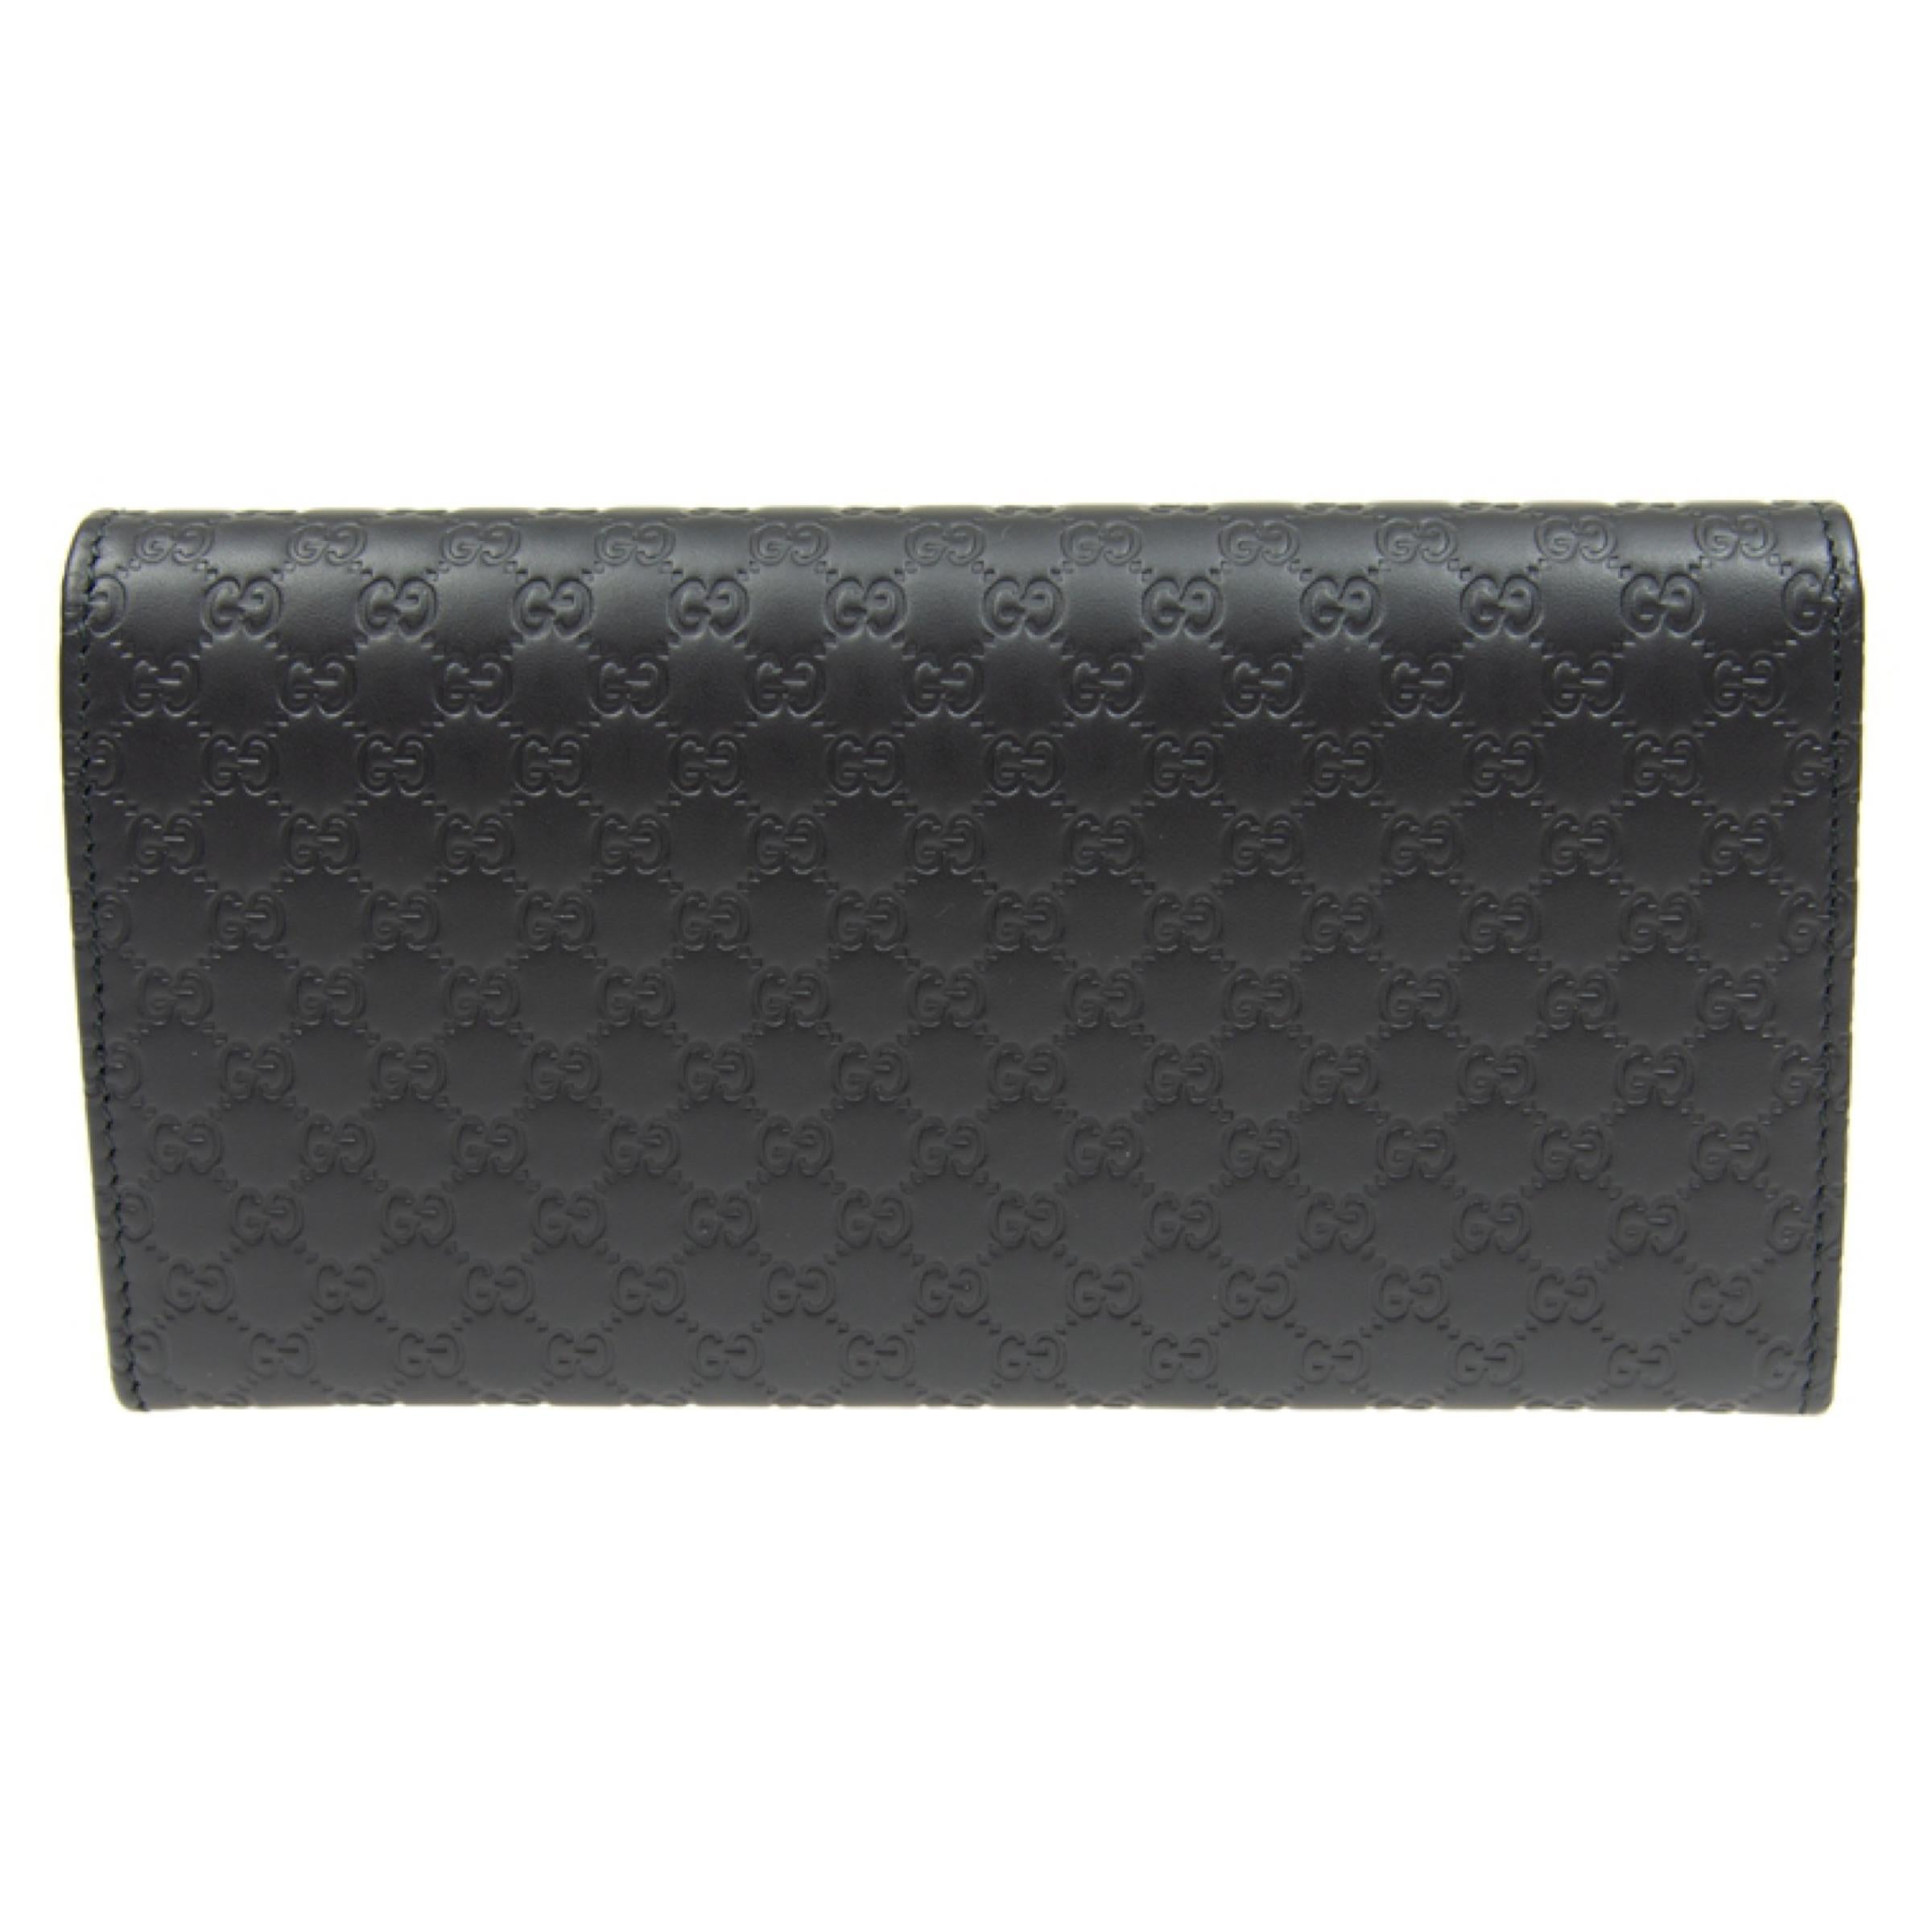 NEW Gucci Black GG Guccissima Monogram Leather Long Wallet Clutch Bag 1